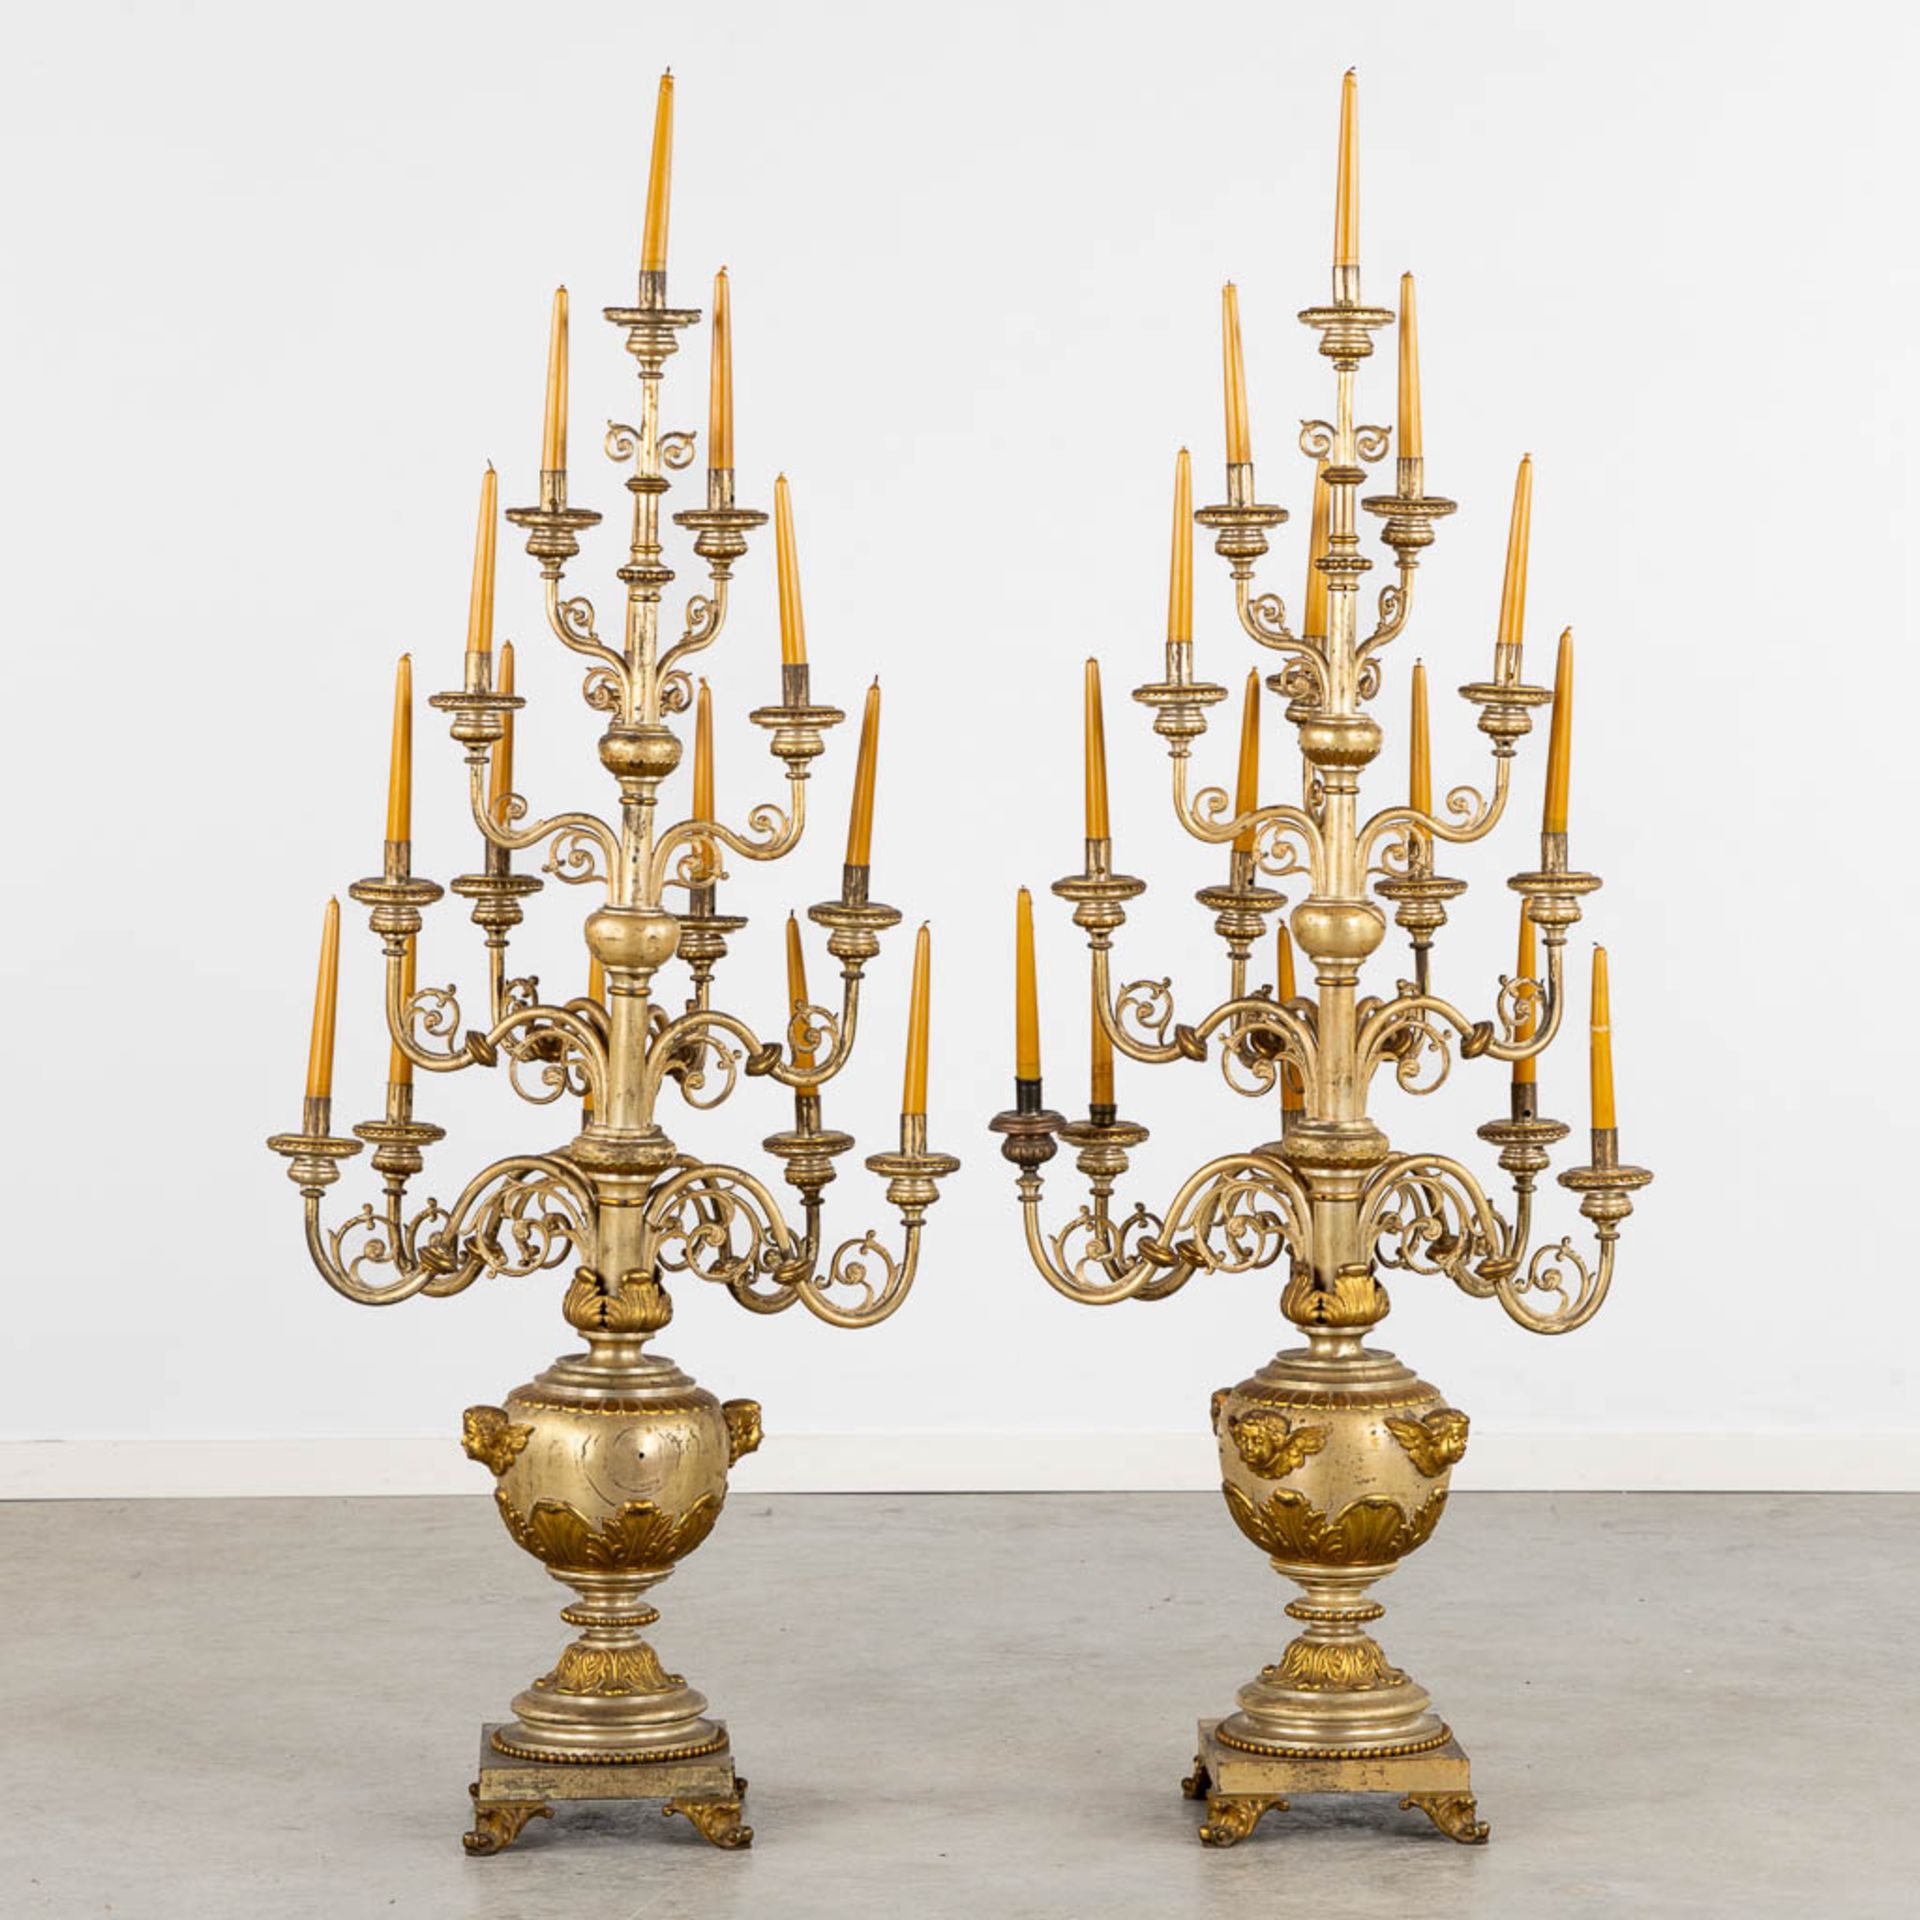 An impressive pair of candelabra, 15 candles, gold and silver-plated metal. (L:44 x W:60 x H:138 cm) - Image 5 of 12